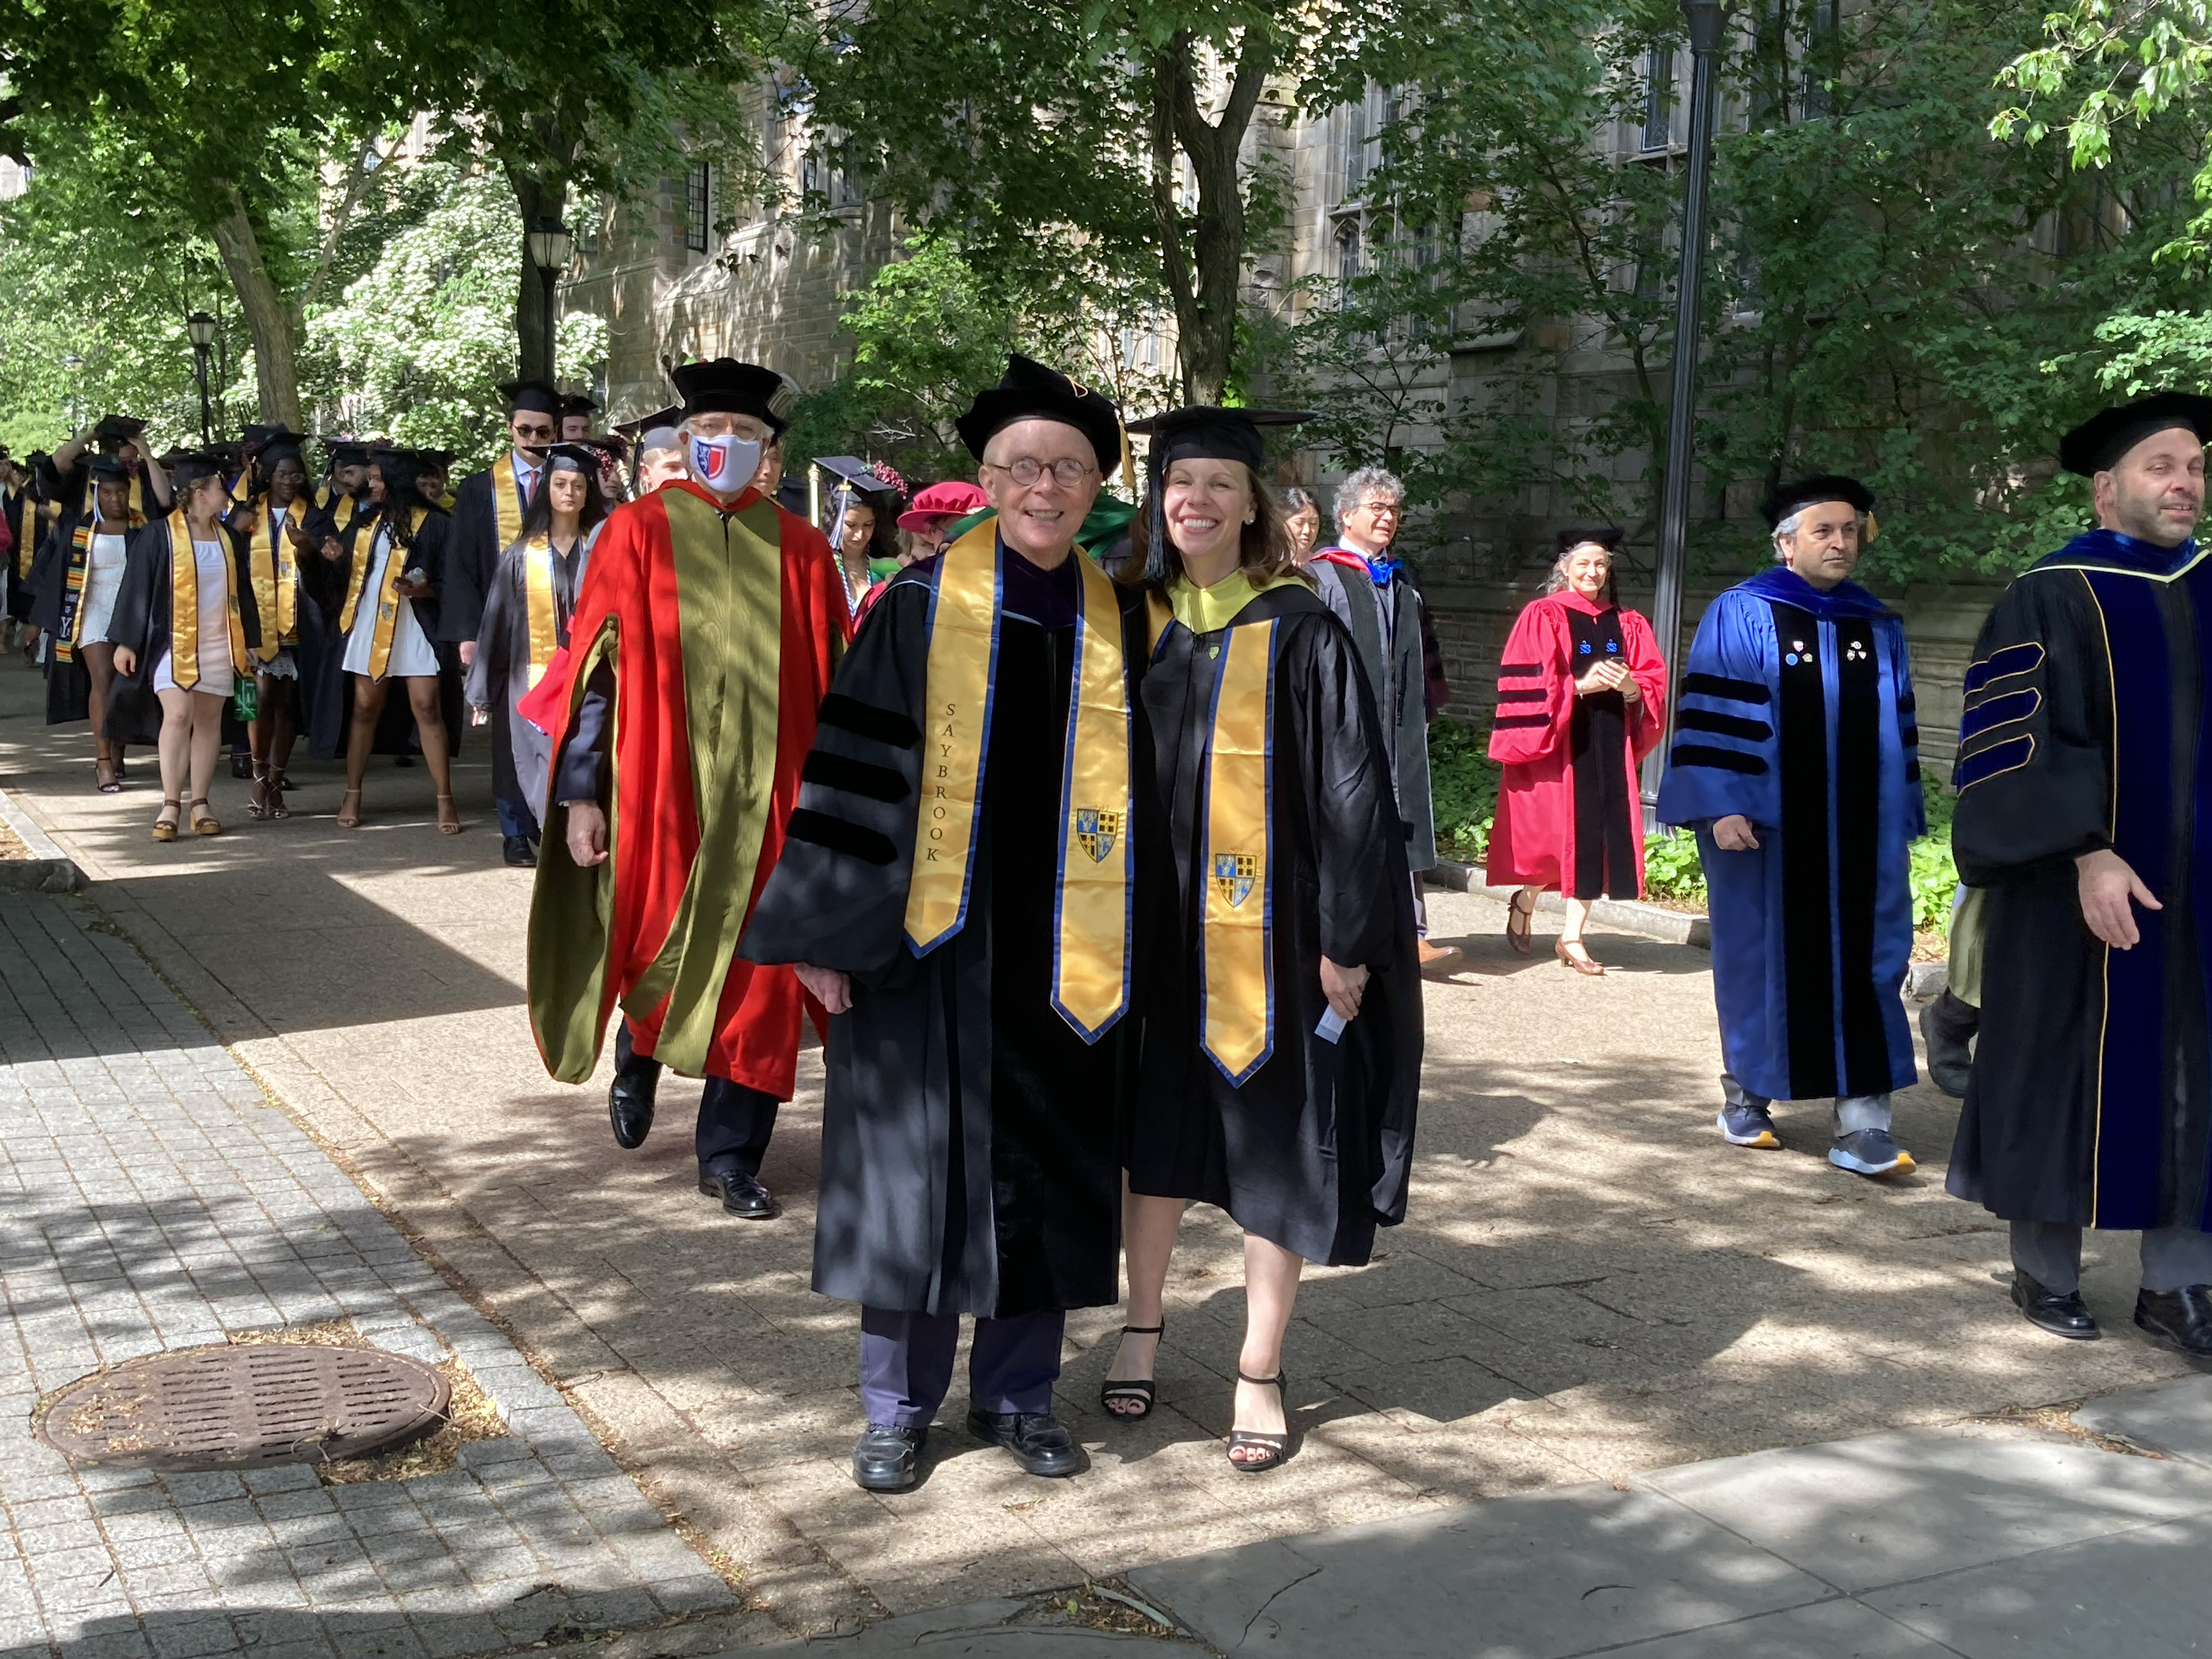 Procession of faculty and students with Fred Berg Yale Class of 66 and University Librarian Barbara Rockenbach in the foreground, wearing robes and caps